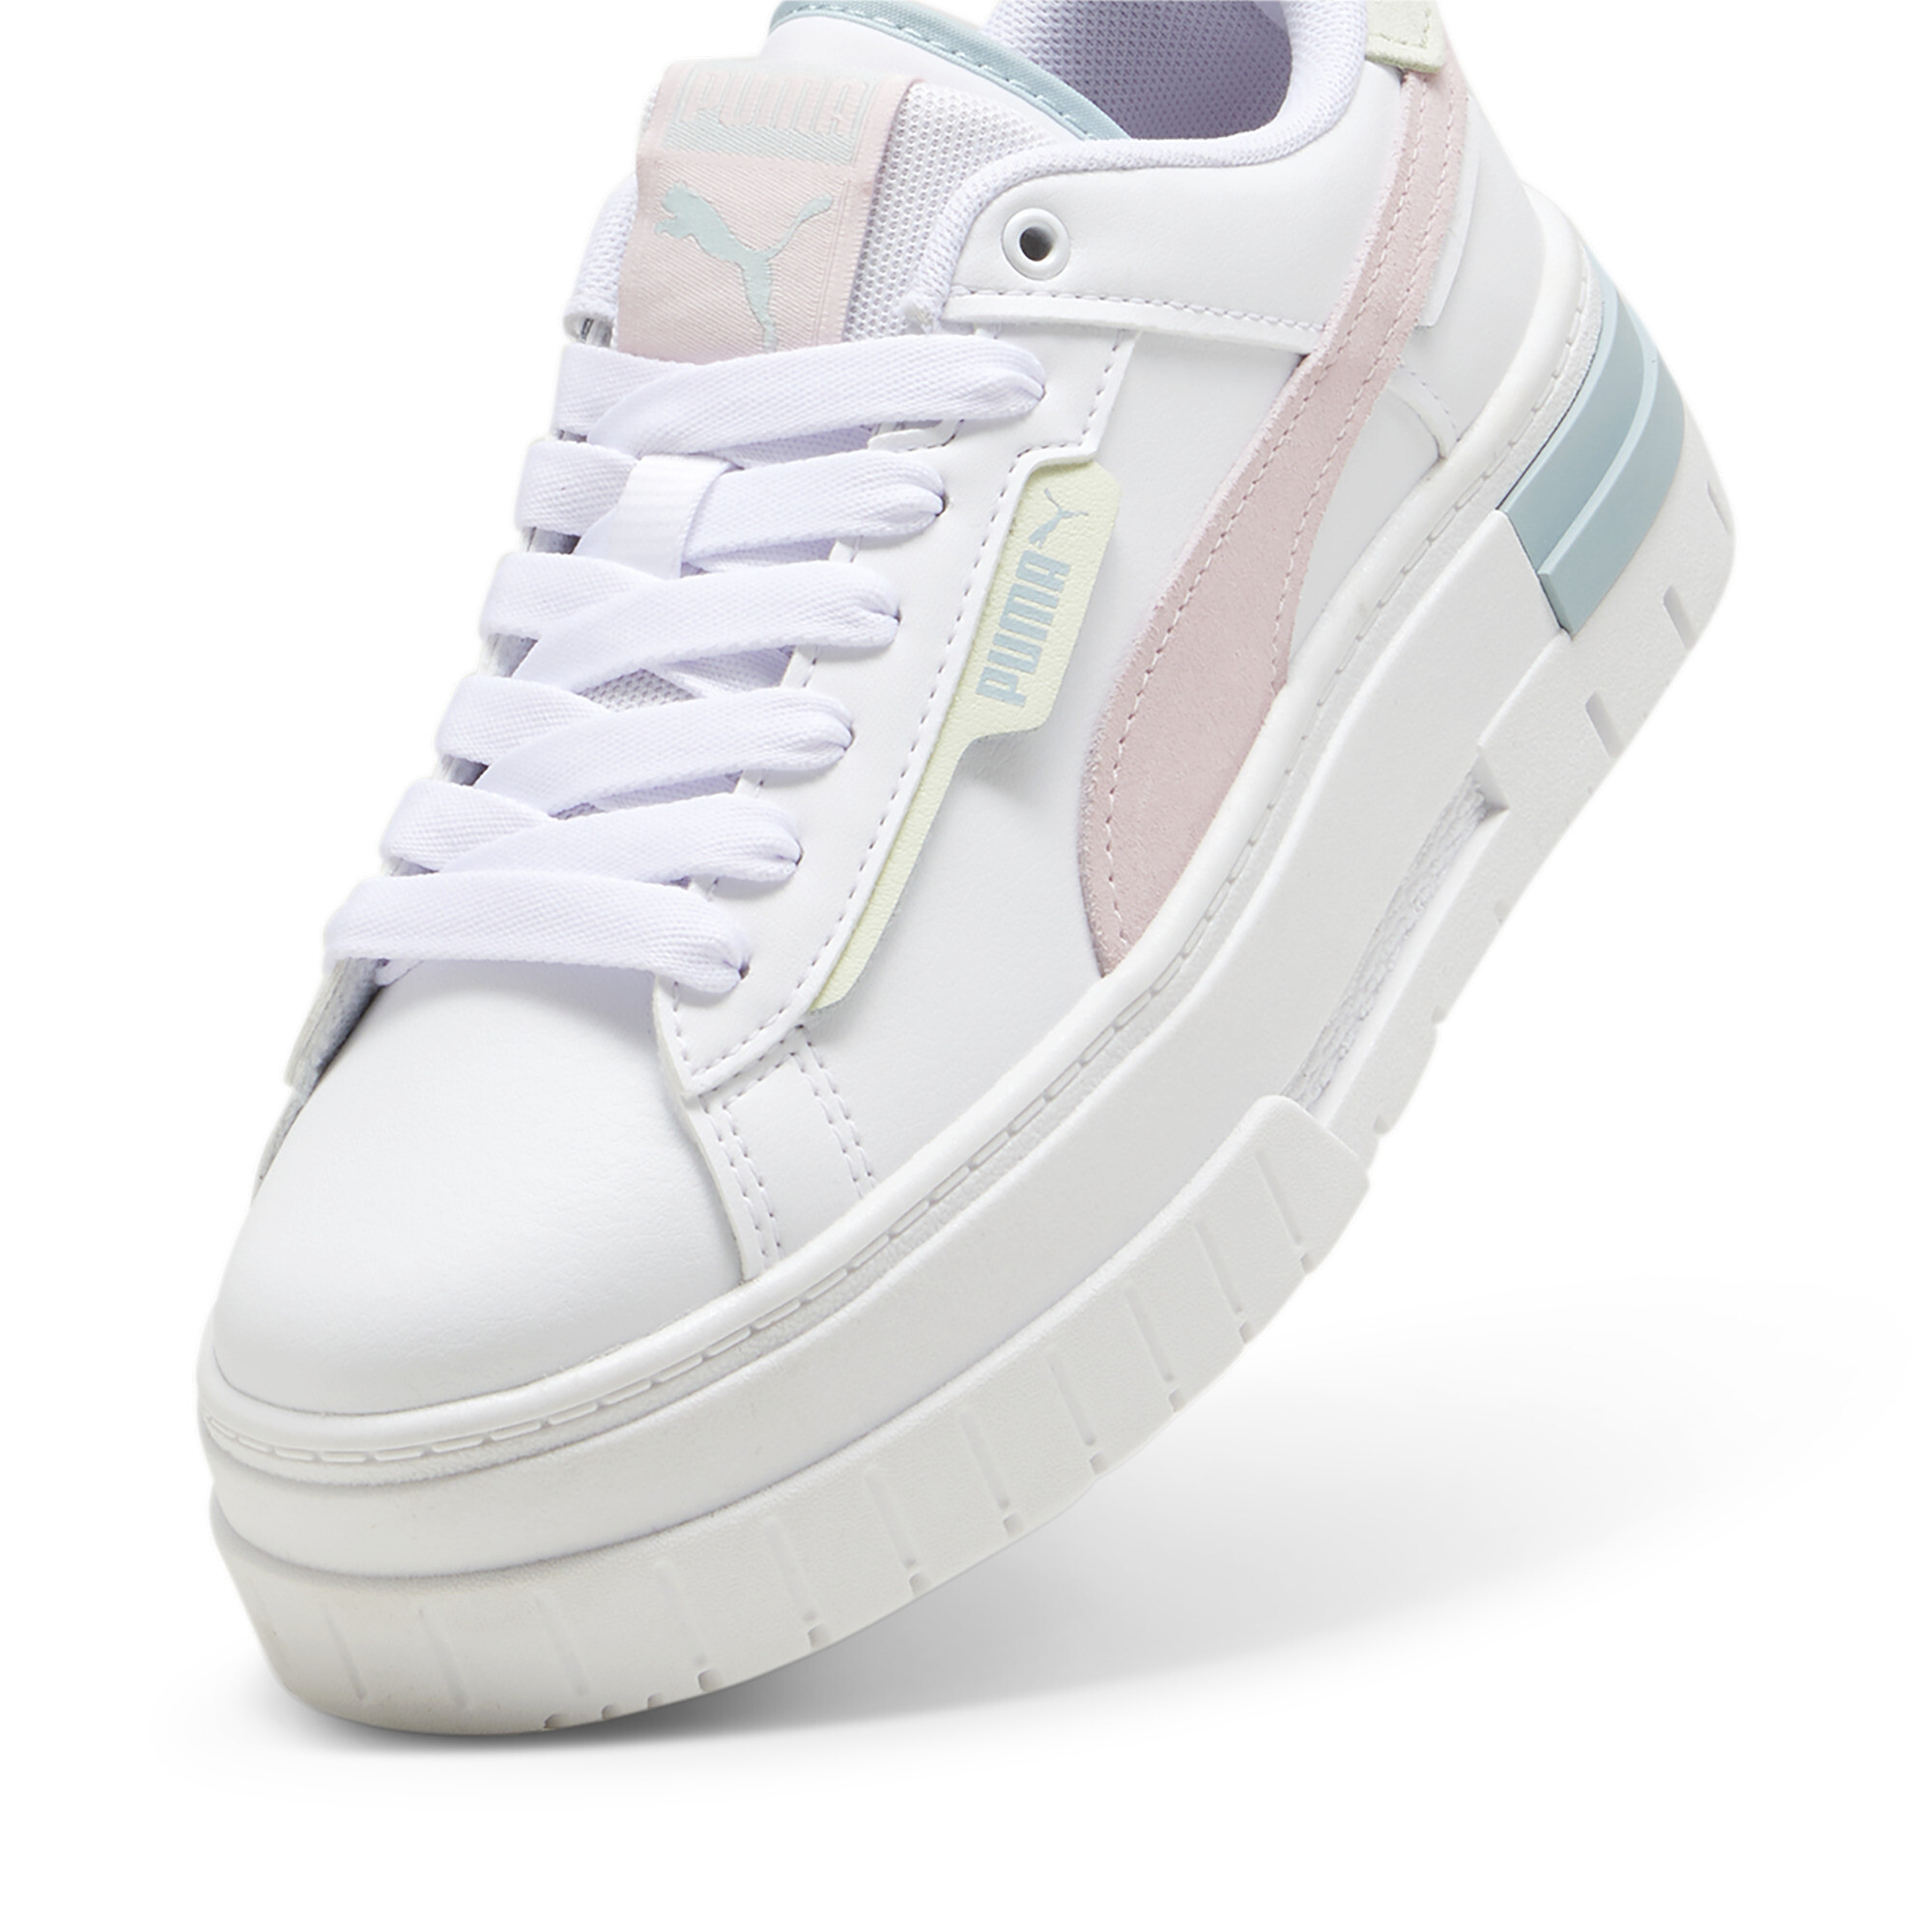 Women's Puma Mayze Crashed Youth Sneakers, White, Size 36, Shoes